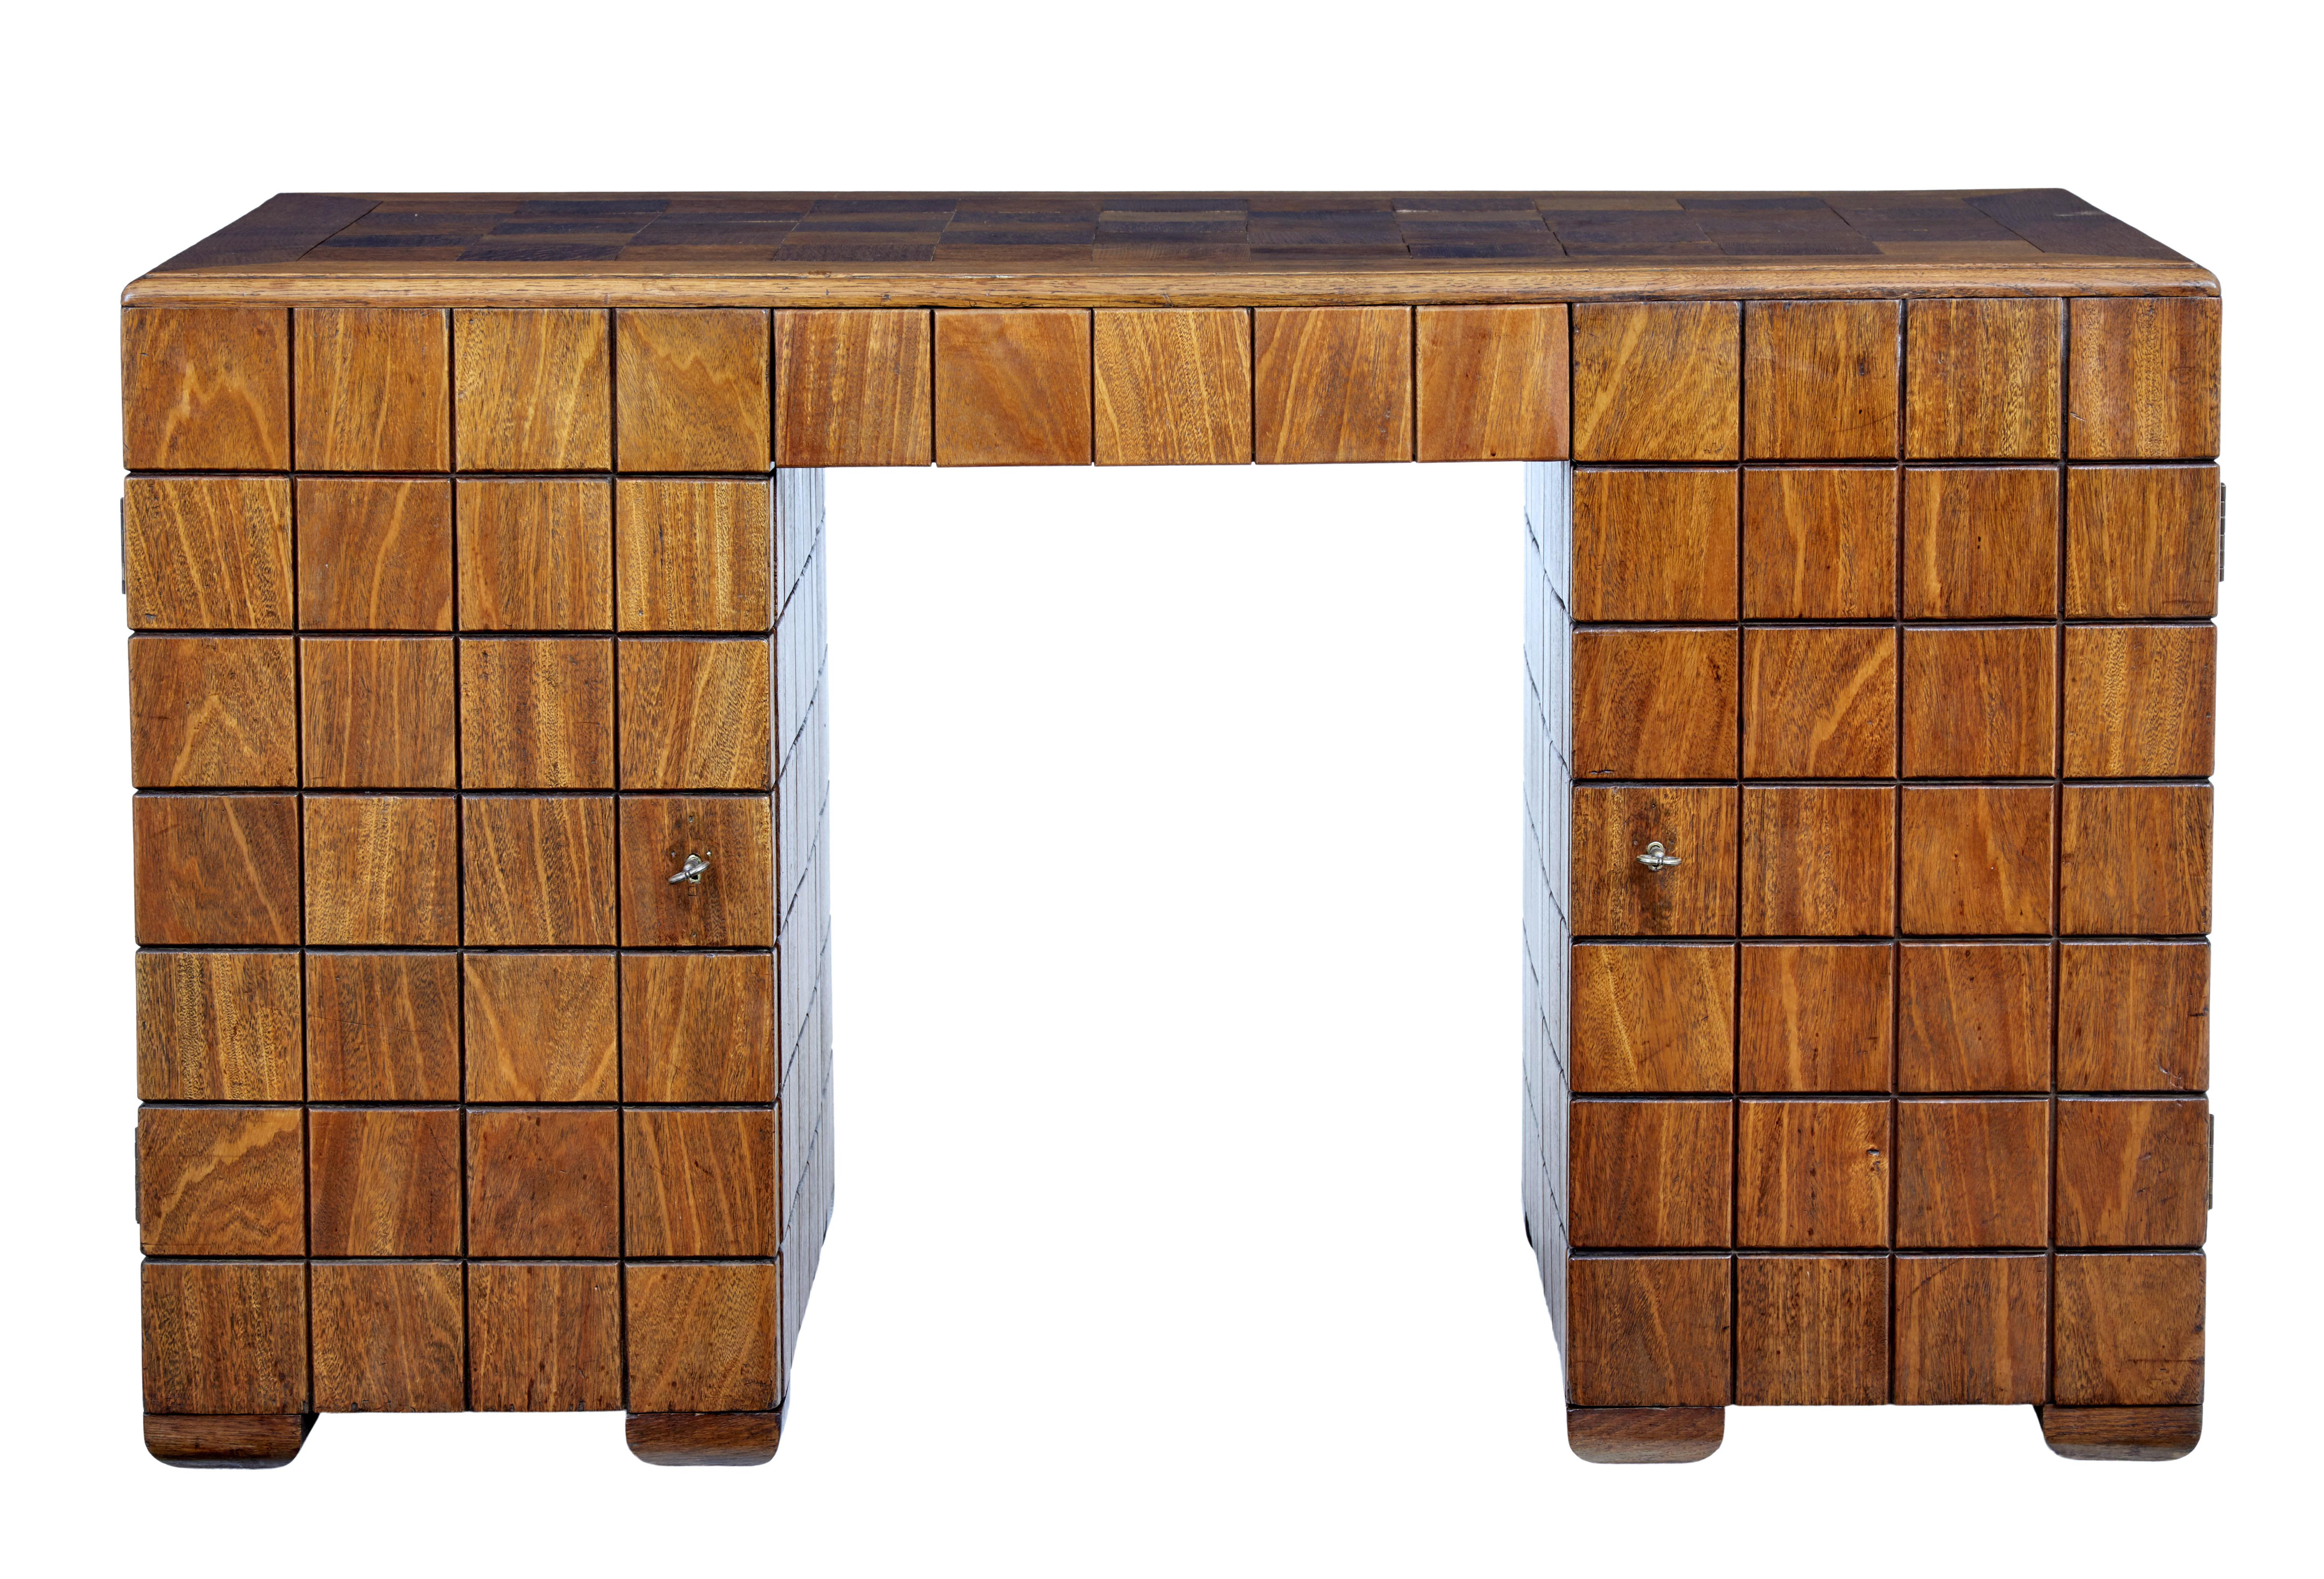 We are pleased to offer this unique rare Art Deco period desk circa 1920.

Made in 1 piece. Writing surface laid with square blocks of solid teak surrounded by border. The panelled effect continues all around the pedestals and reverse which makes